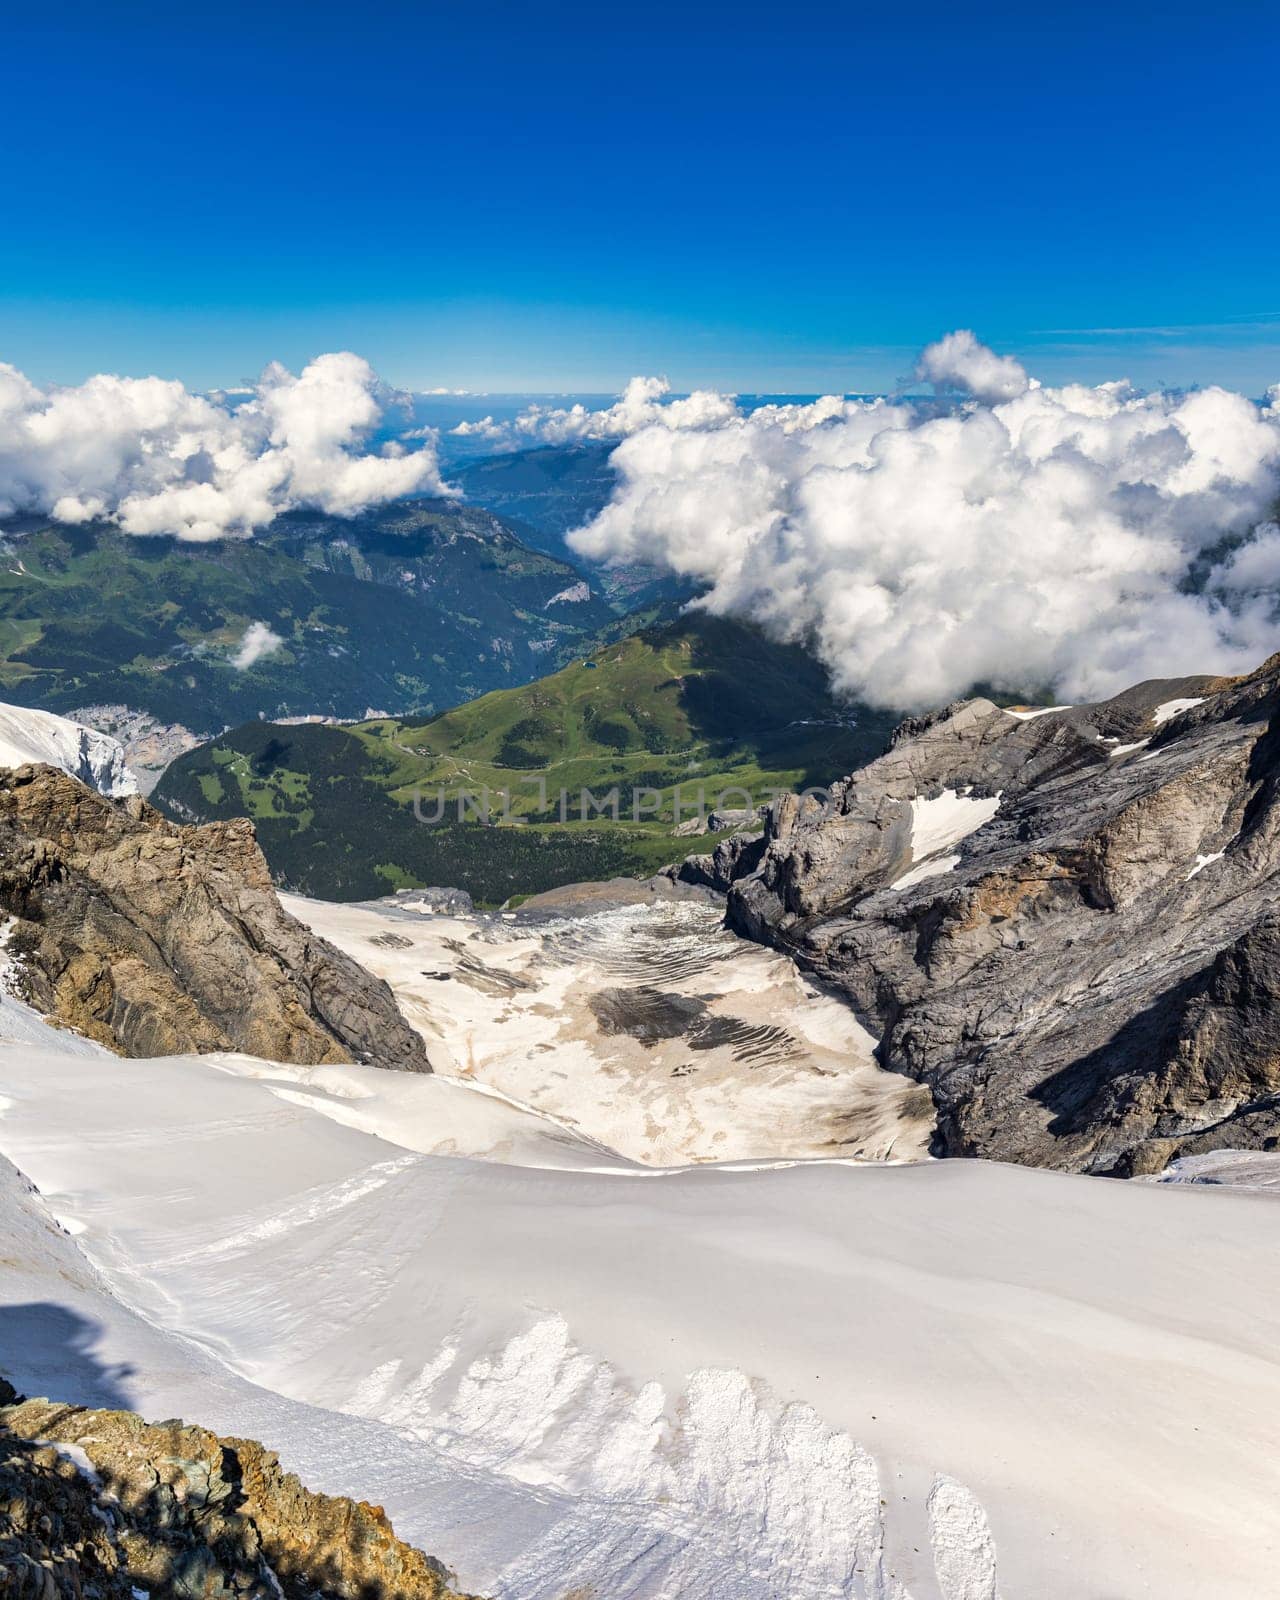 Aletsch Glacier in the Jungfraujoch, Switzerland. Jungfraujoch, Top of Europe, one of the highest observatories in the world located at the Jungfrau railway station, Bernese Oberland, Switzerland. by DaLiu